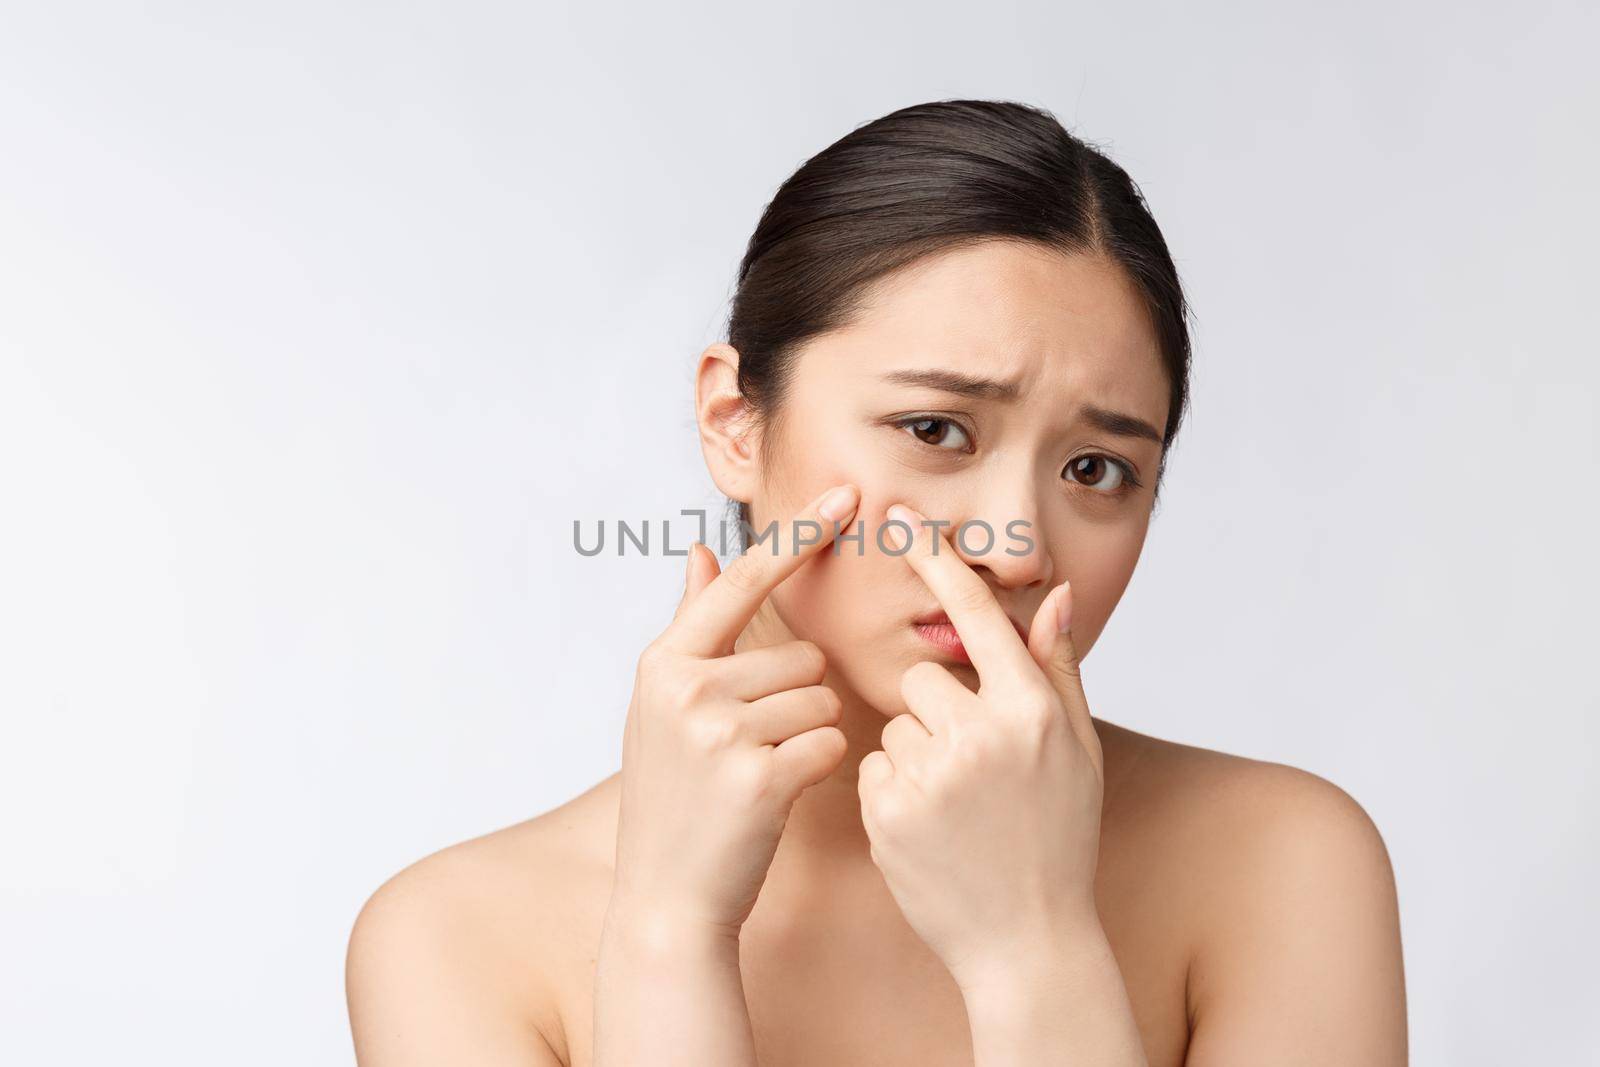 Face Skin Problem - young woman unhappy touch her skin isolated, concept for skin care, asian